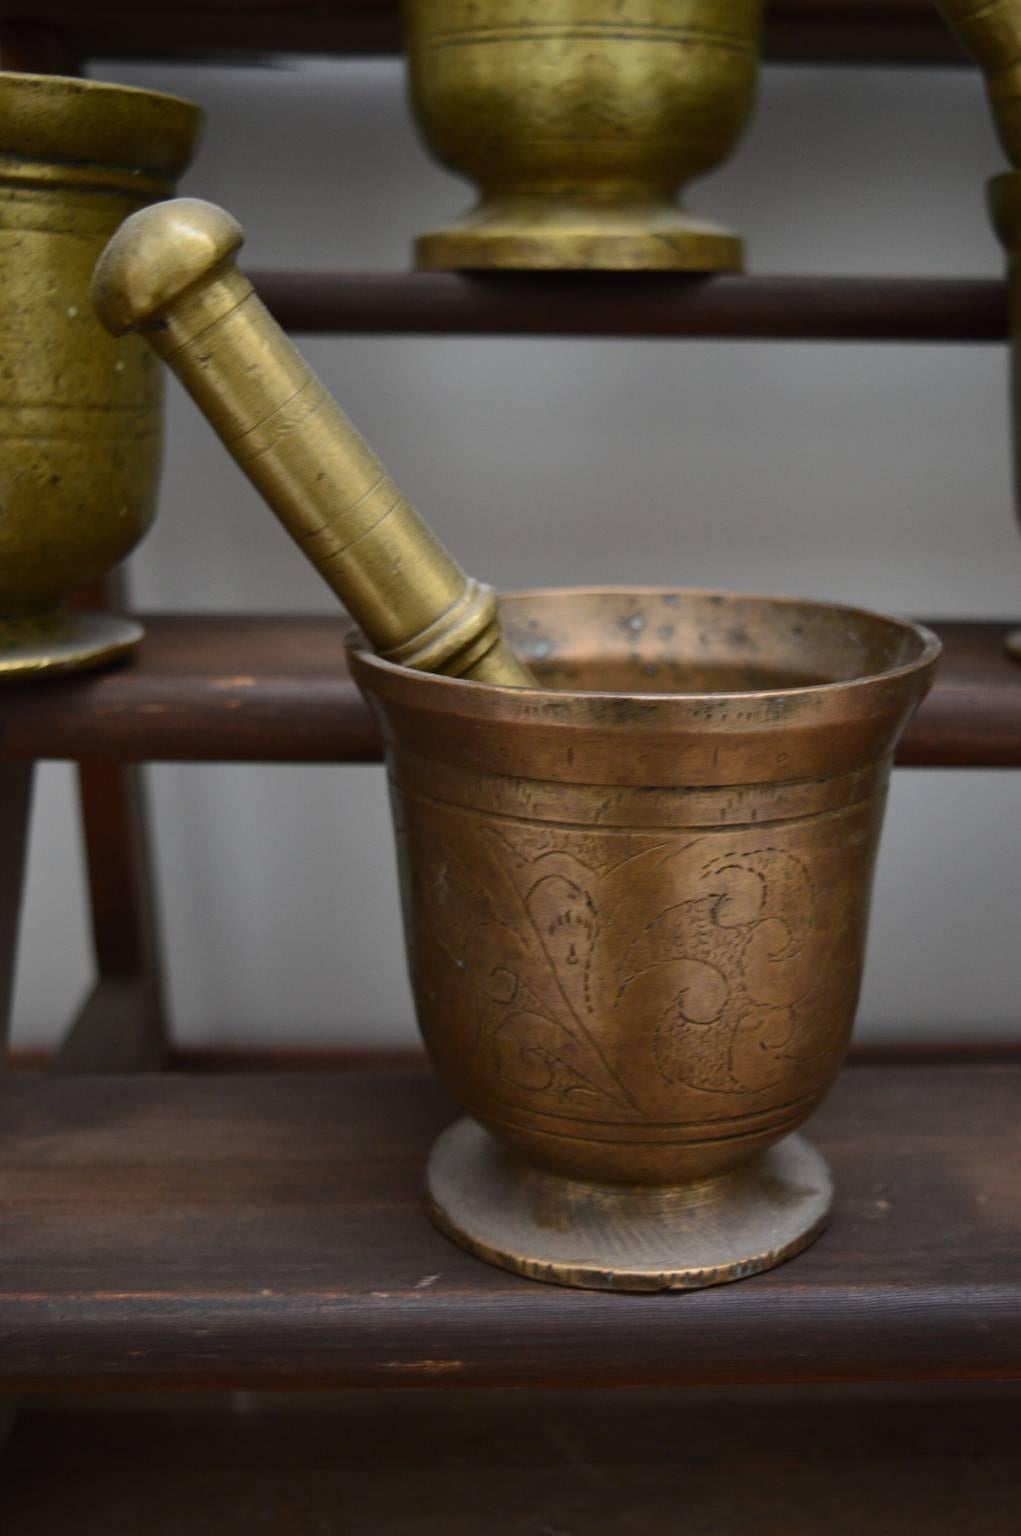 Extremely decorative  bronze mortar and pestles made in the Flanders region in the 17th and 18th Centuries.
The largest mortar is 16 cm high and weighs 4.50 kg(with pestle).
The smallest is 12 cm high and 2 kg.
Priced individually, please specify